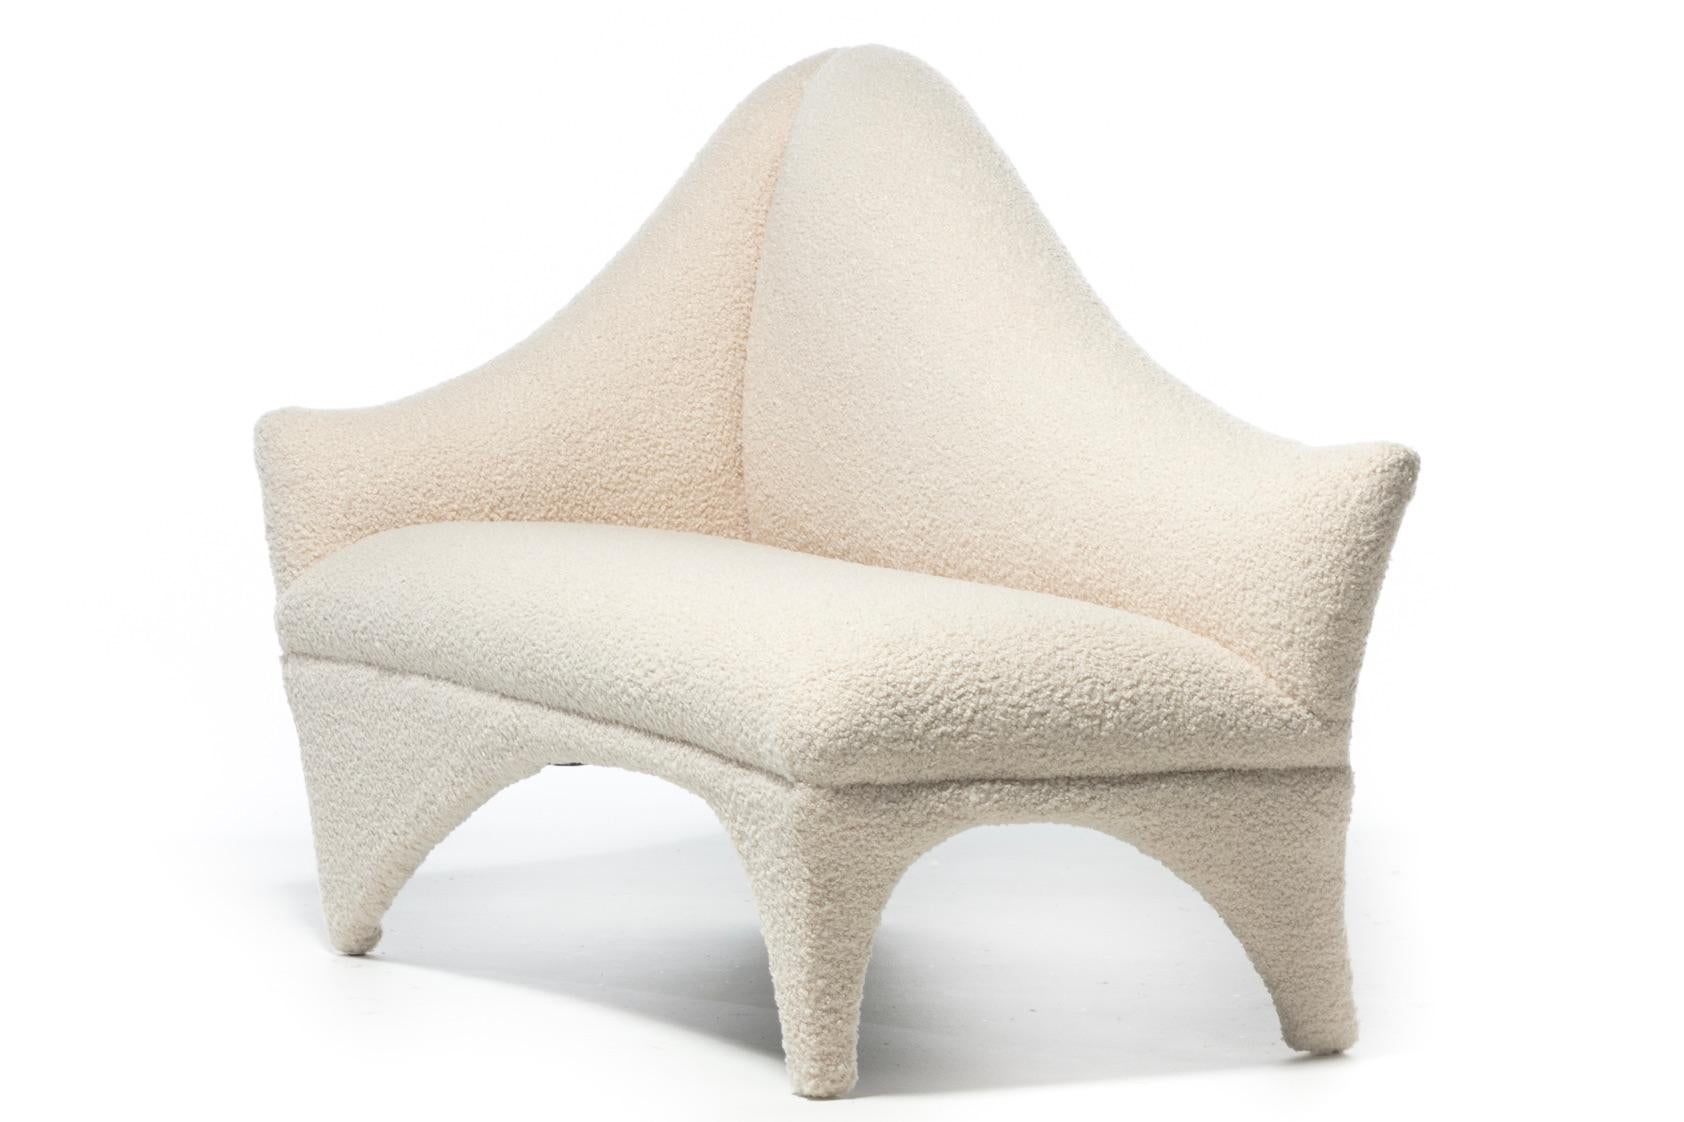 Vladimir Kagan A-Symmetric Settee in Ivory Bouclé by Directional, c. 1991 In Good Condition For Sale In Saint Louis, MO